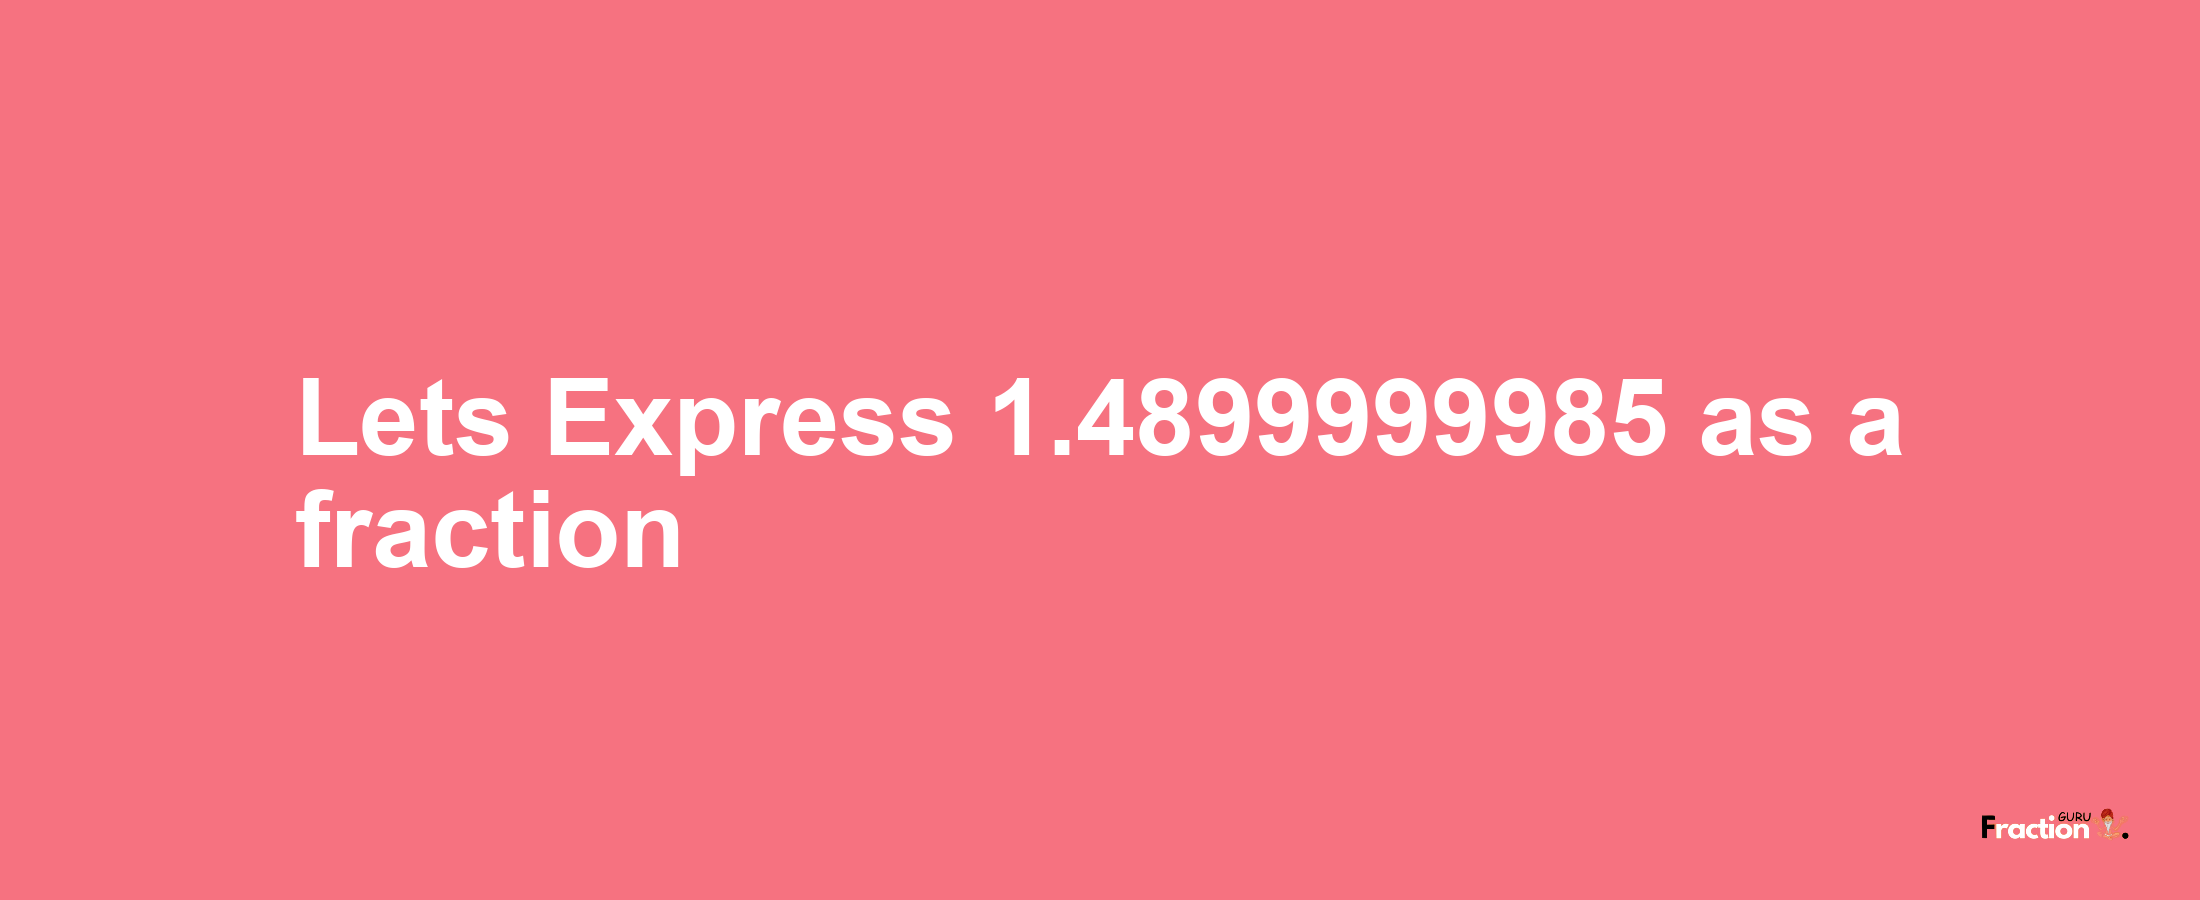 Lets Express 1.4899999985 as afraction